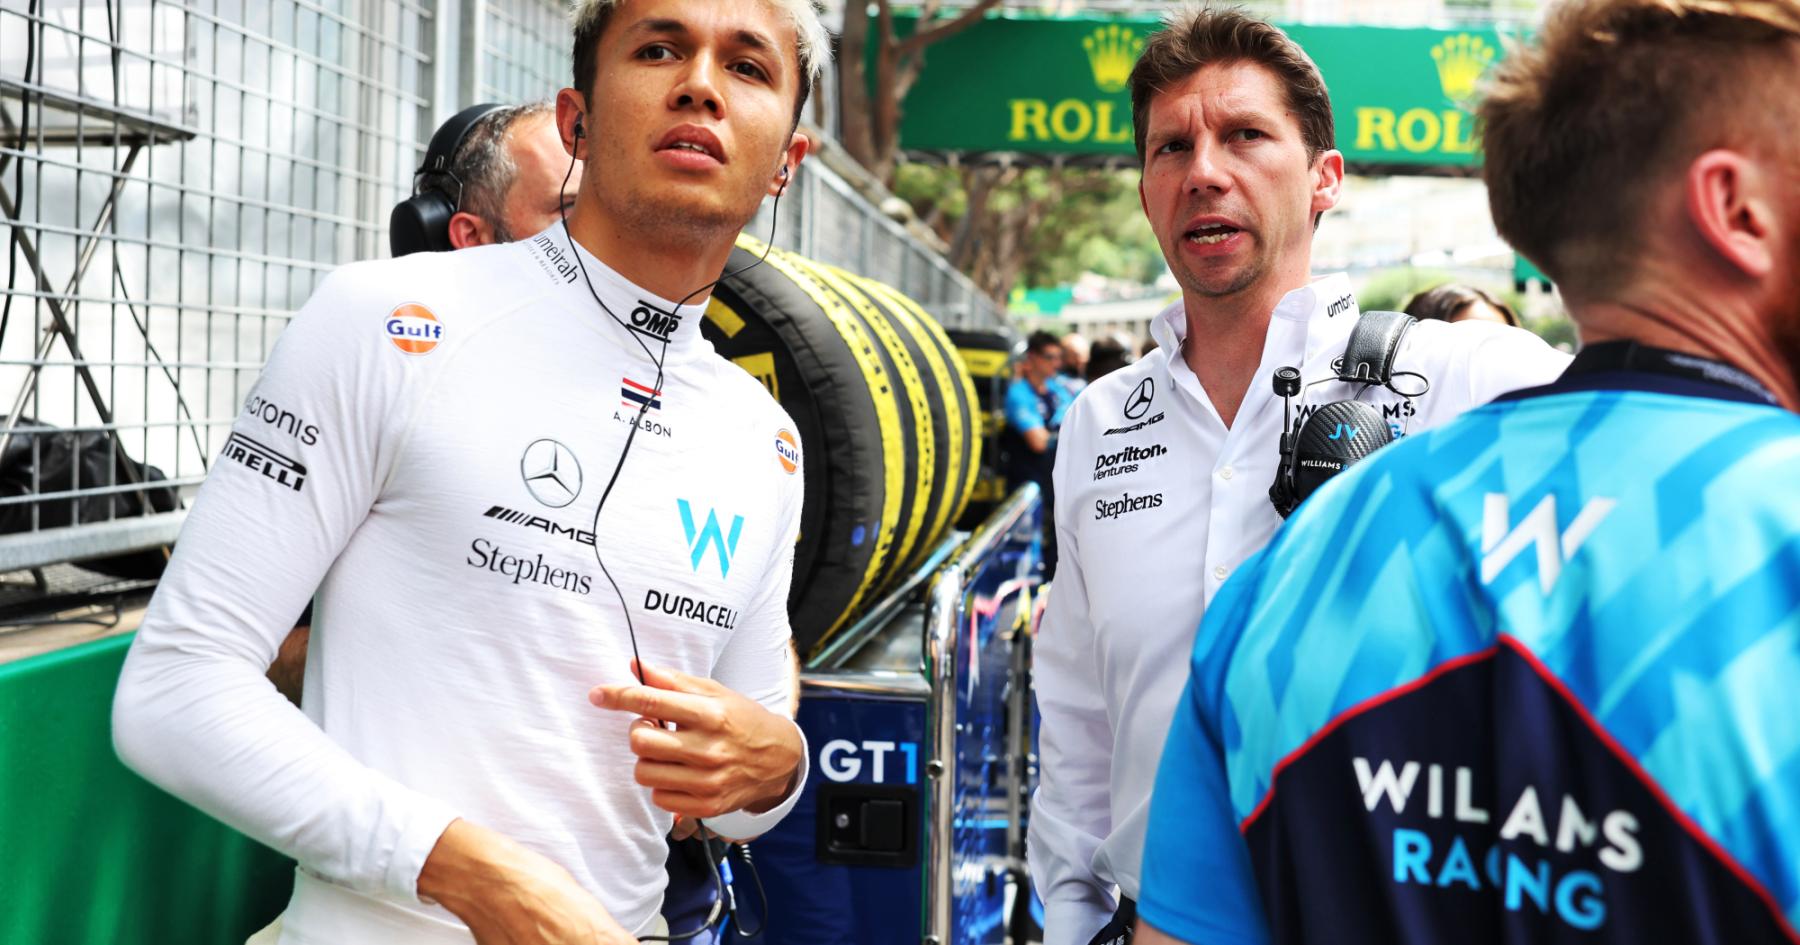 Can Vowles use Mercedes experience to drive Williams to success?